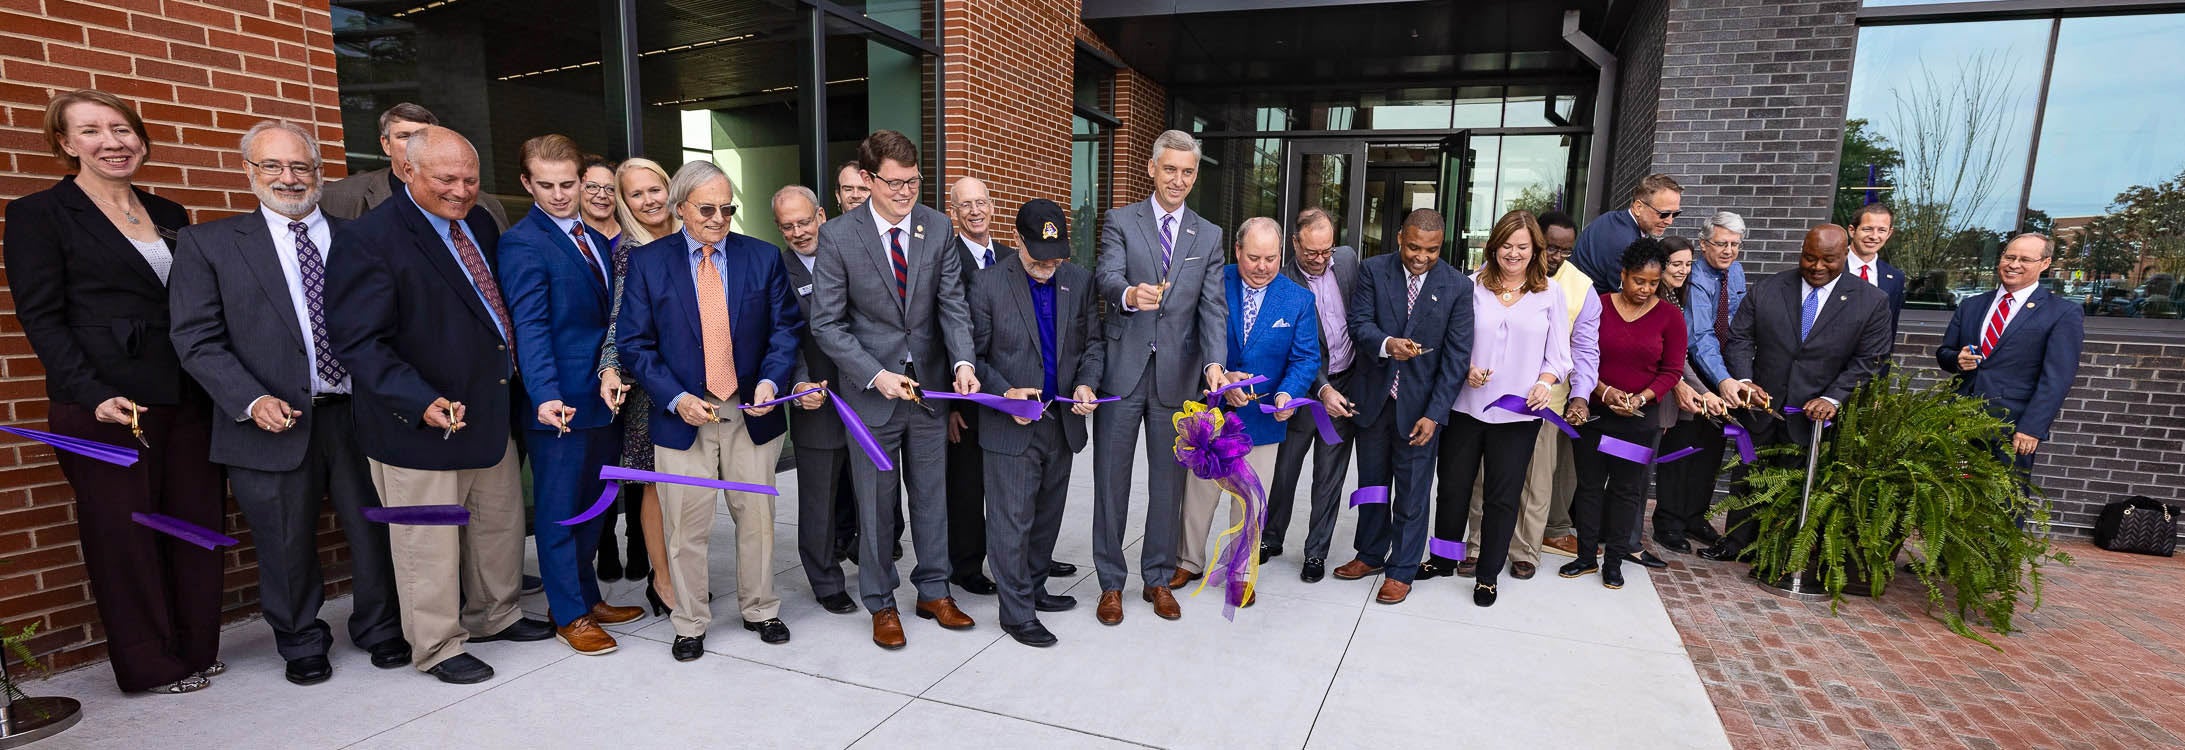 Chancellor Philip Rogers, ECU Board of Trustees members and other dignitaries cut the ribbon to officially open the new Life Sciences and Biotechnology Building.